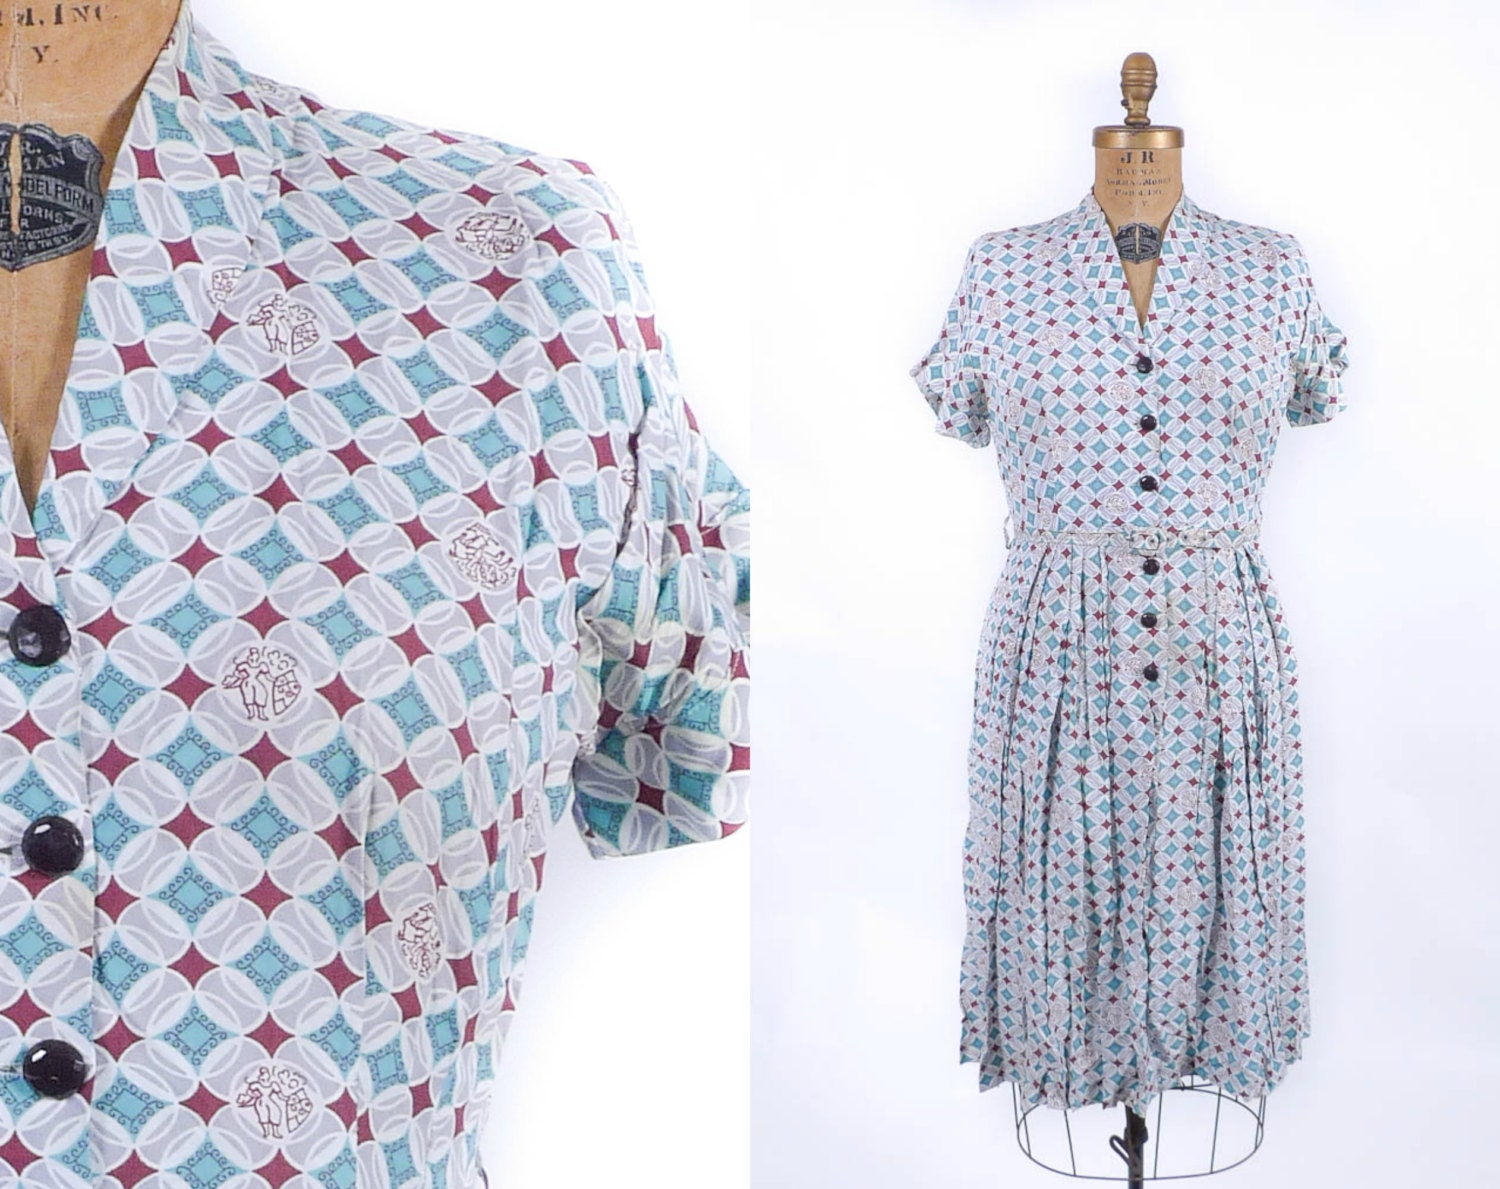 ON SALE: Vintage 1950's Dress - The Queen of Diamonds Patterned Rayon Dress - sz L